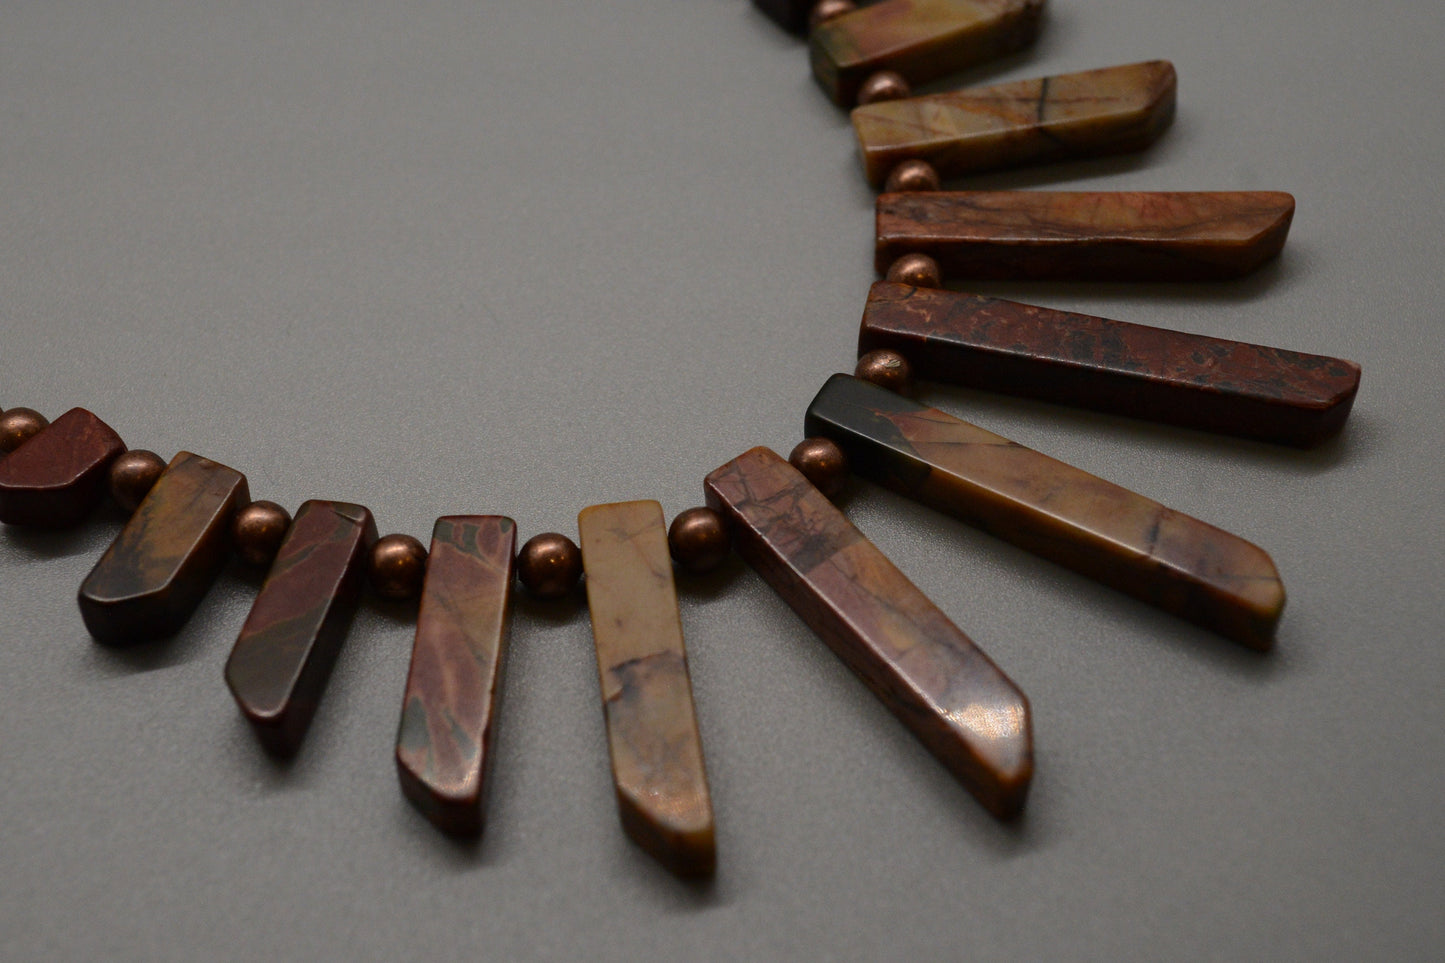 Copper and Jasper Collar Necklace, RBG Necklace, Made in Maine